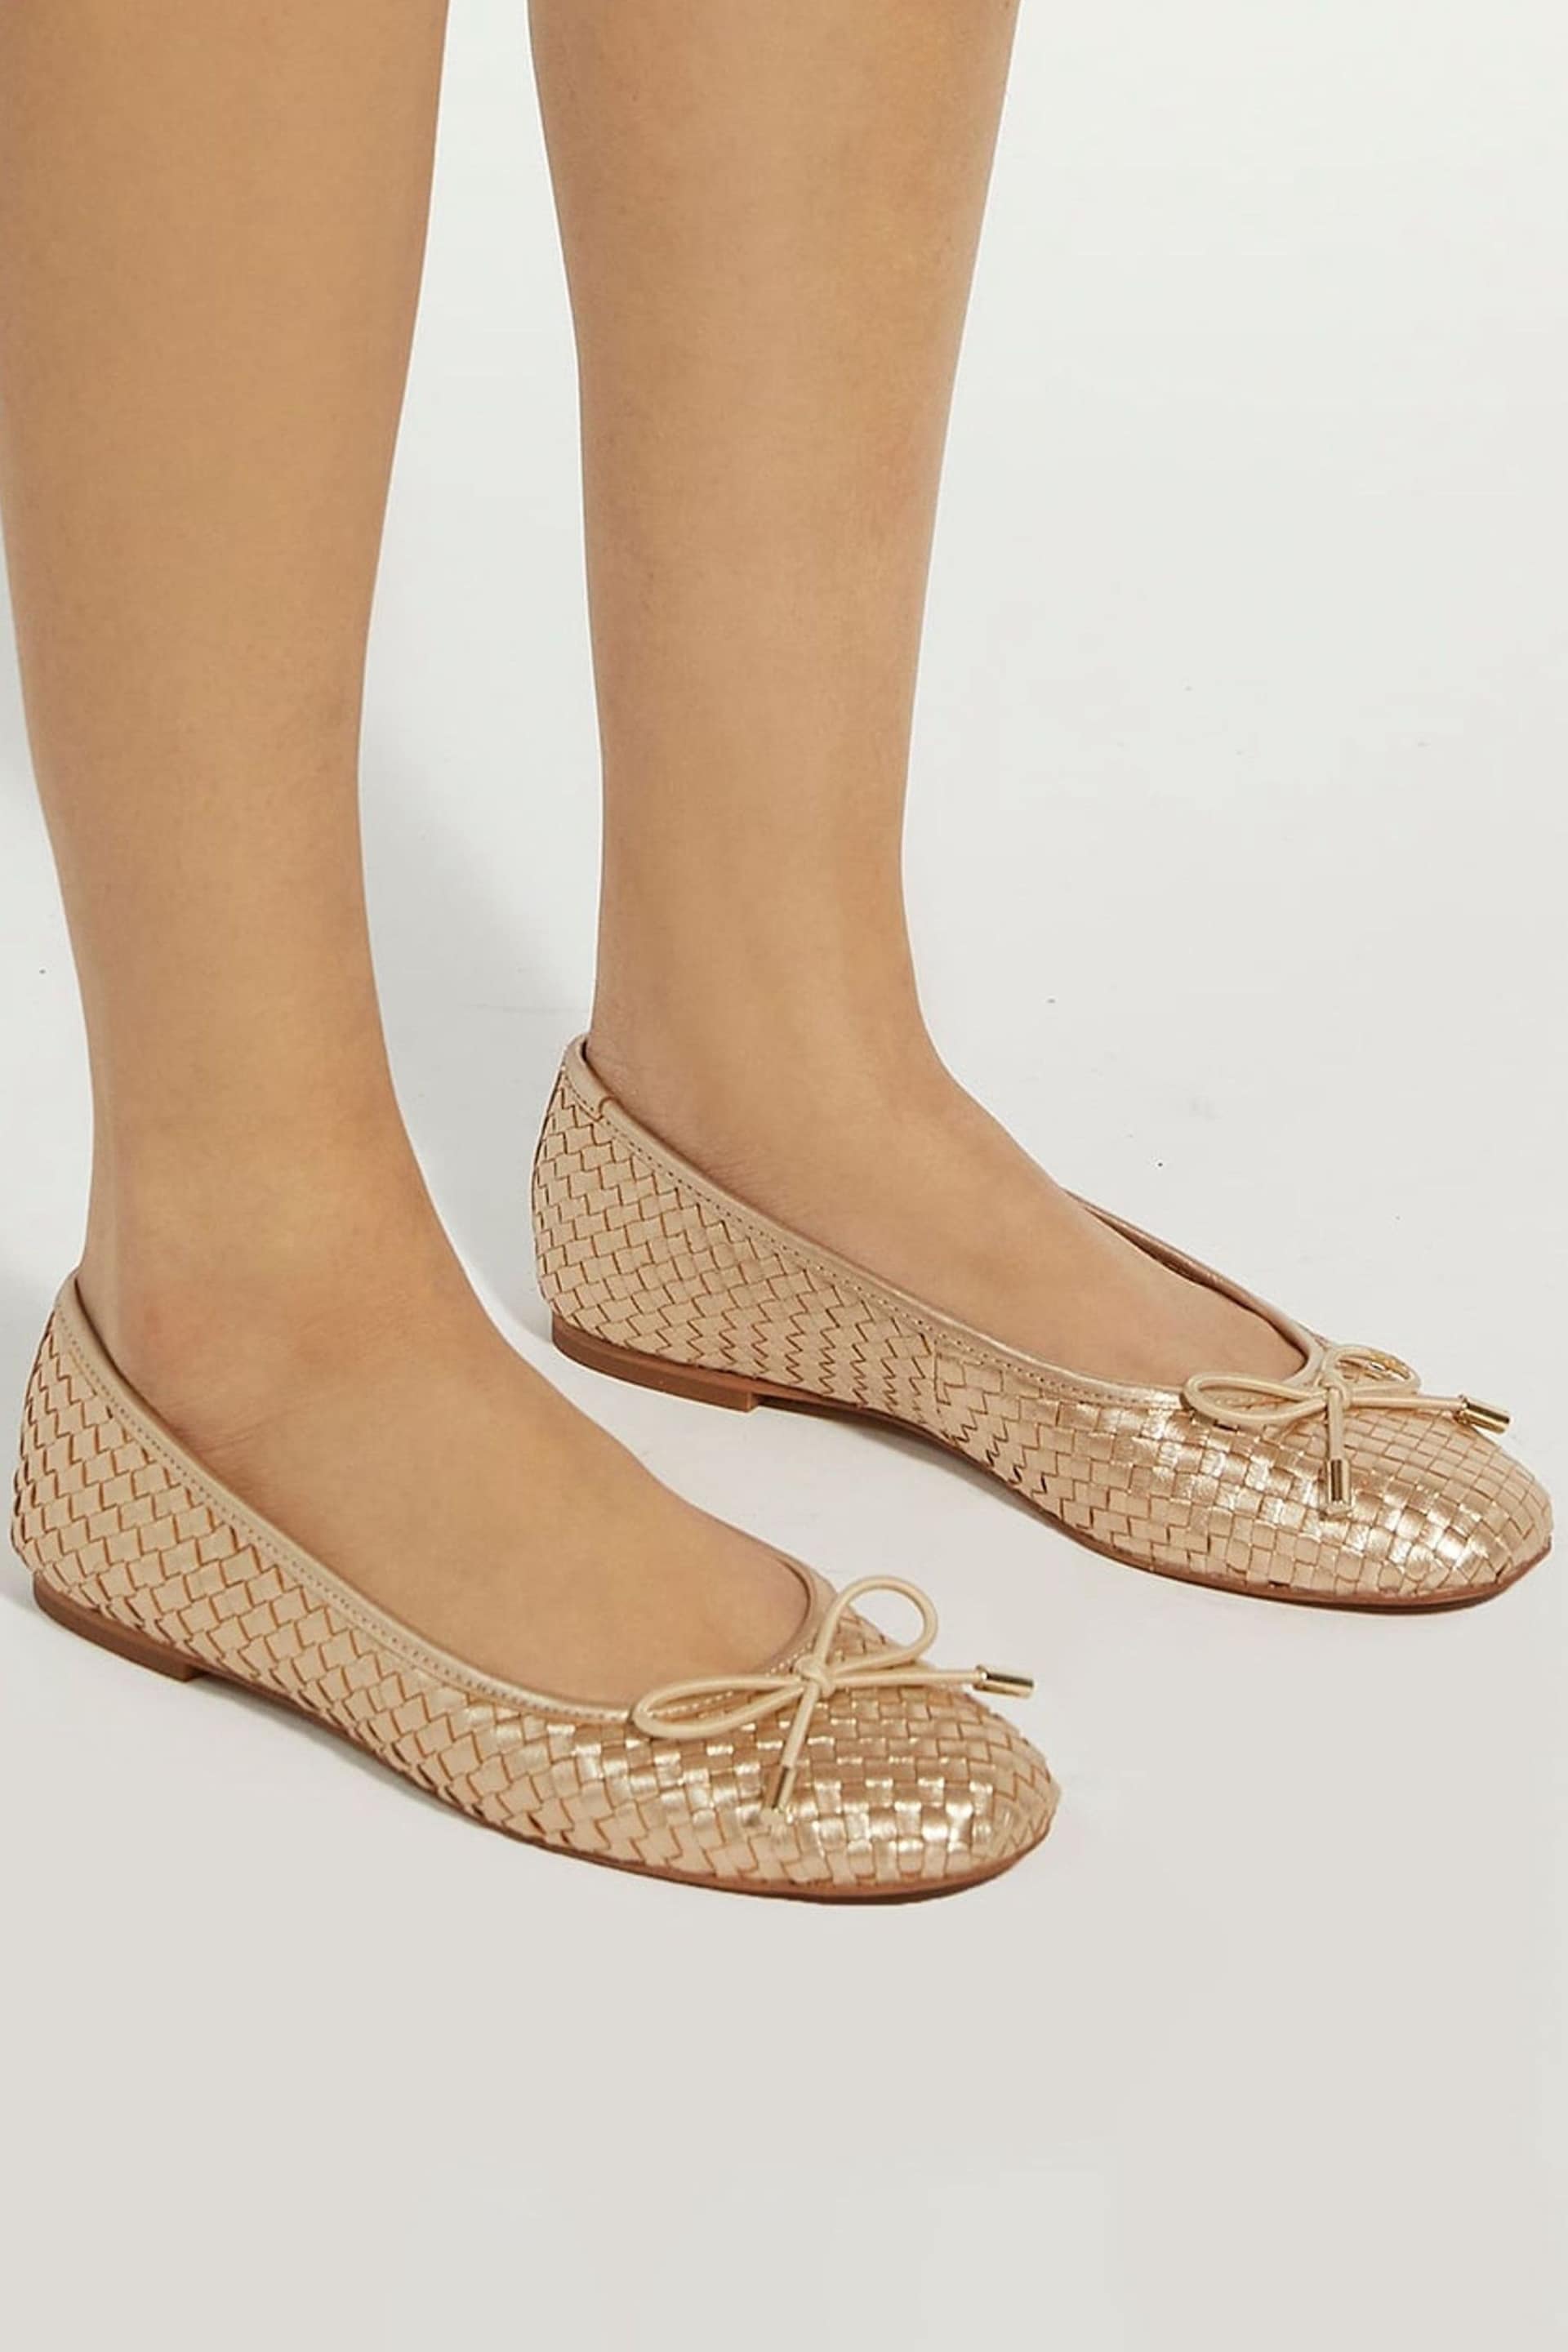 Dune London Gold Heights Flexible Sole Woven Ballerina Flat Shoes - Image 6 of 7